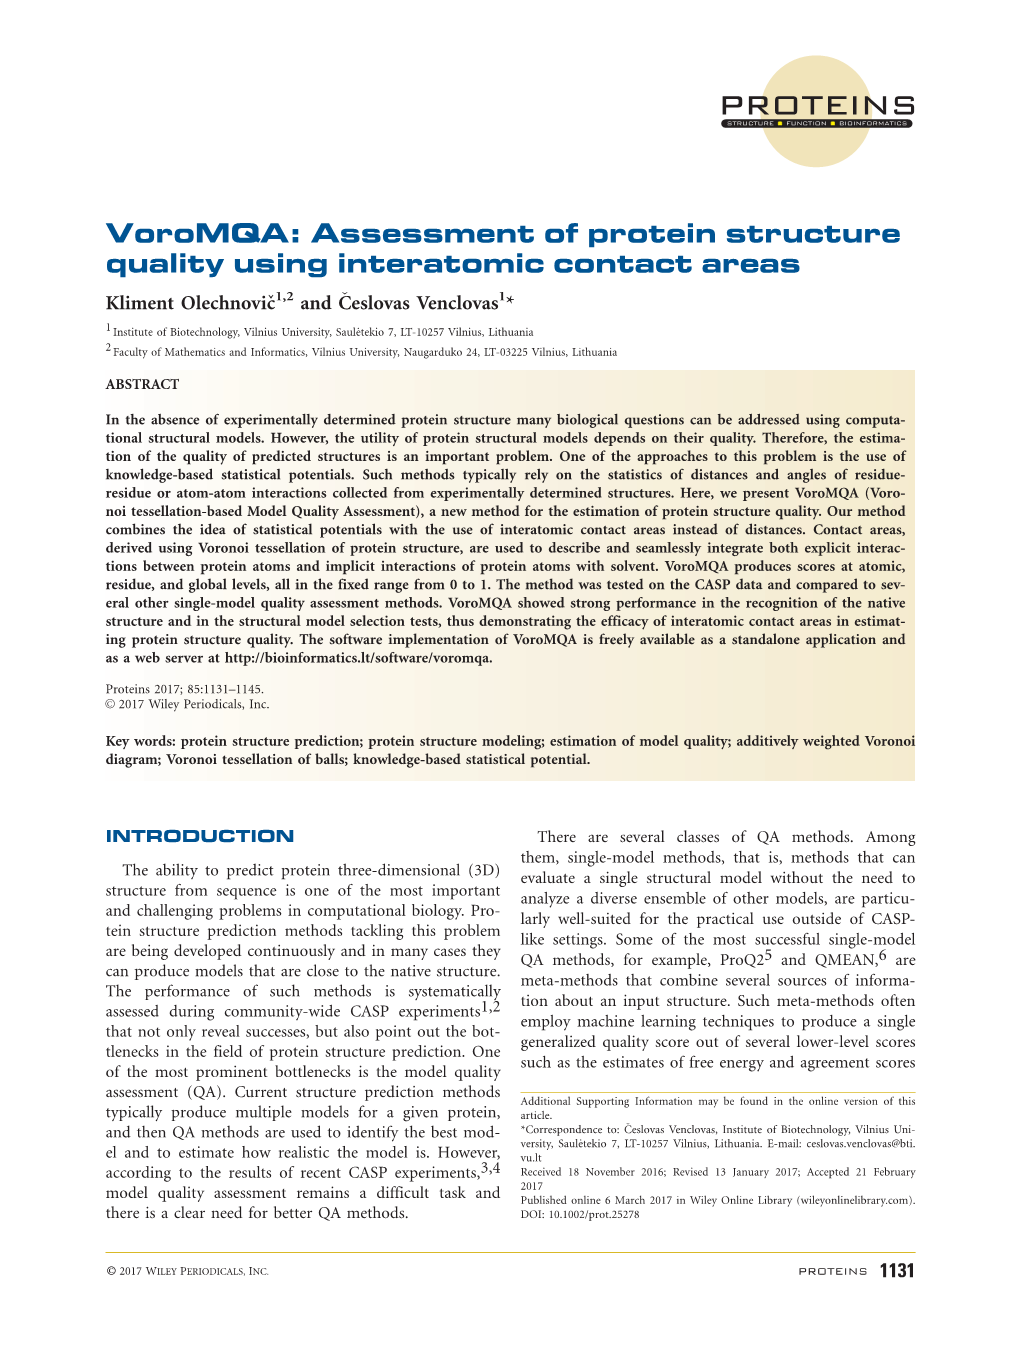 Voromqa: Assessment of Protein Structure Quality Using Interatomic Contact Areas Kliment Olechnovicˇ1,2 and Ceslovas� Venclovas1*